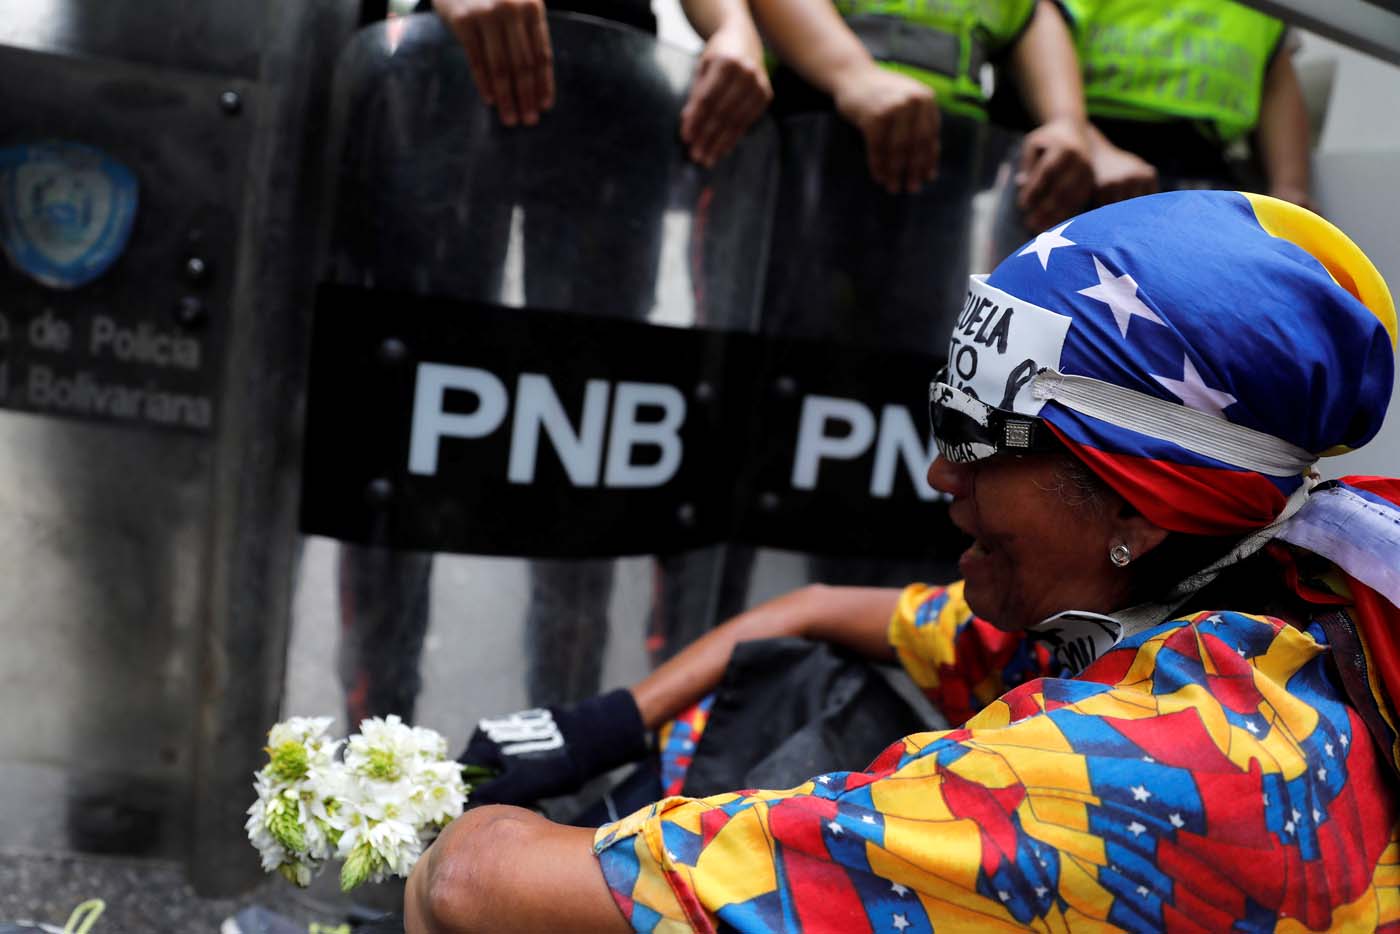 A demonstrator holds flowers next to riot policemen during a women's march to protest against President Nicolas Maduro's government in Caracas, Venezuela, May 6, 2017. REUTERS/Carlos Garcia Rawlins